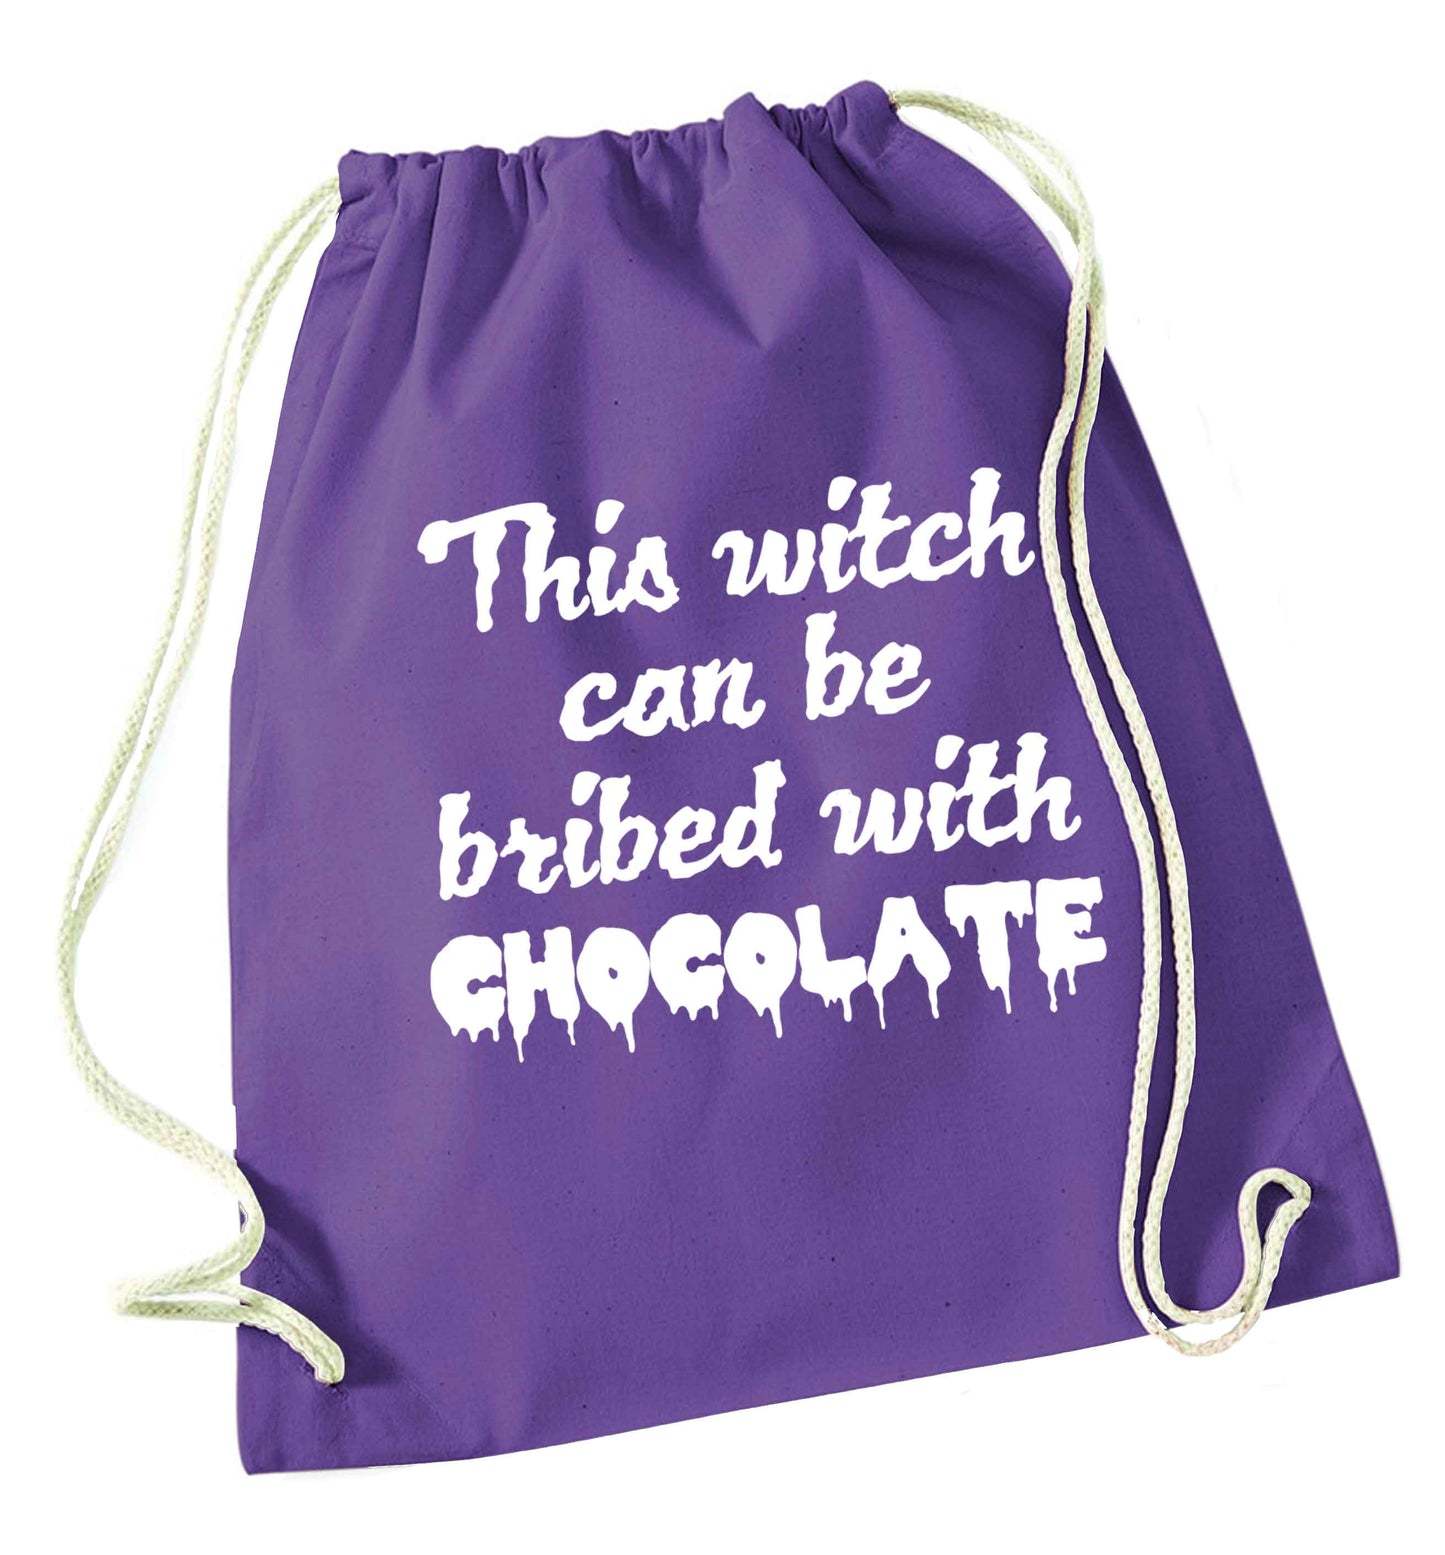 This witch can be bribed with chocolate purple drawstring bag